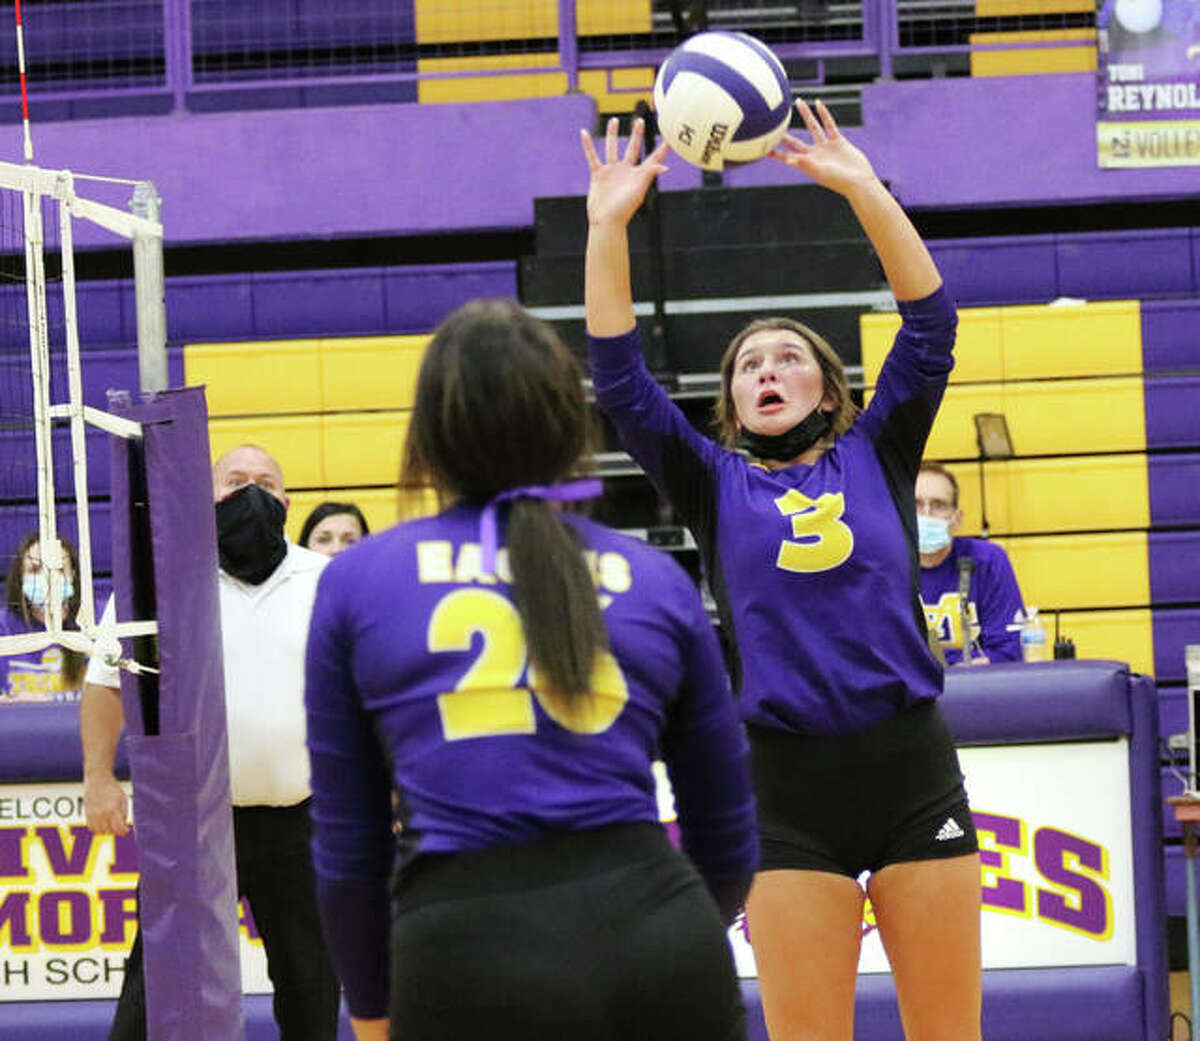 CM’s Maddie Brueckner (3) sets while teammate Camryn Gehrs goes to the net during Tuesday’s MVC match vs. Mascoutah in Bethalto. On Thursday in Jerseyville, Brueckner had a career-high 38 assists in the Eagles’ win over Jersey.